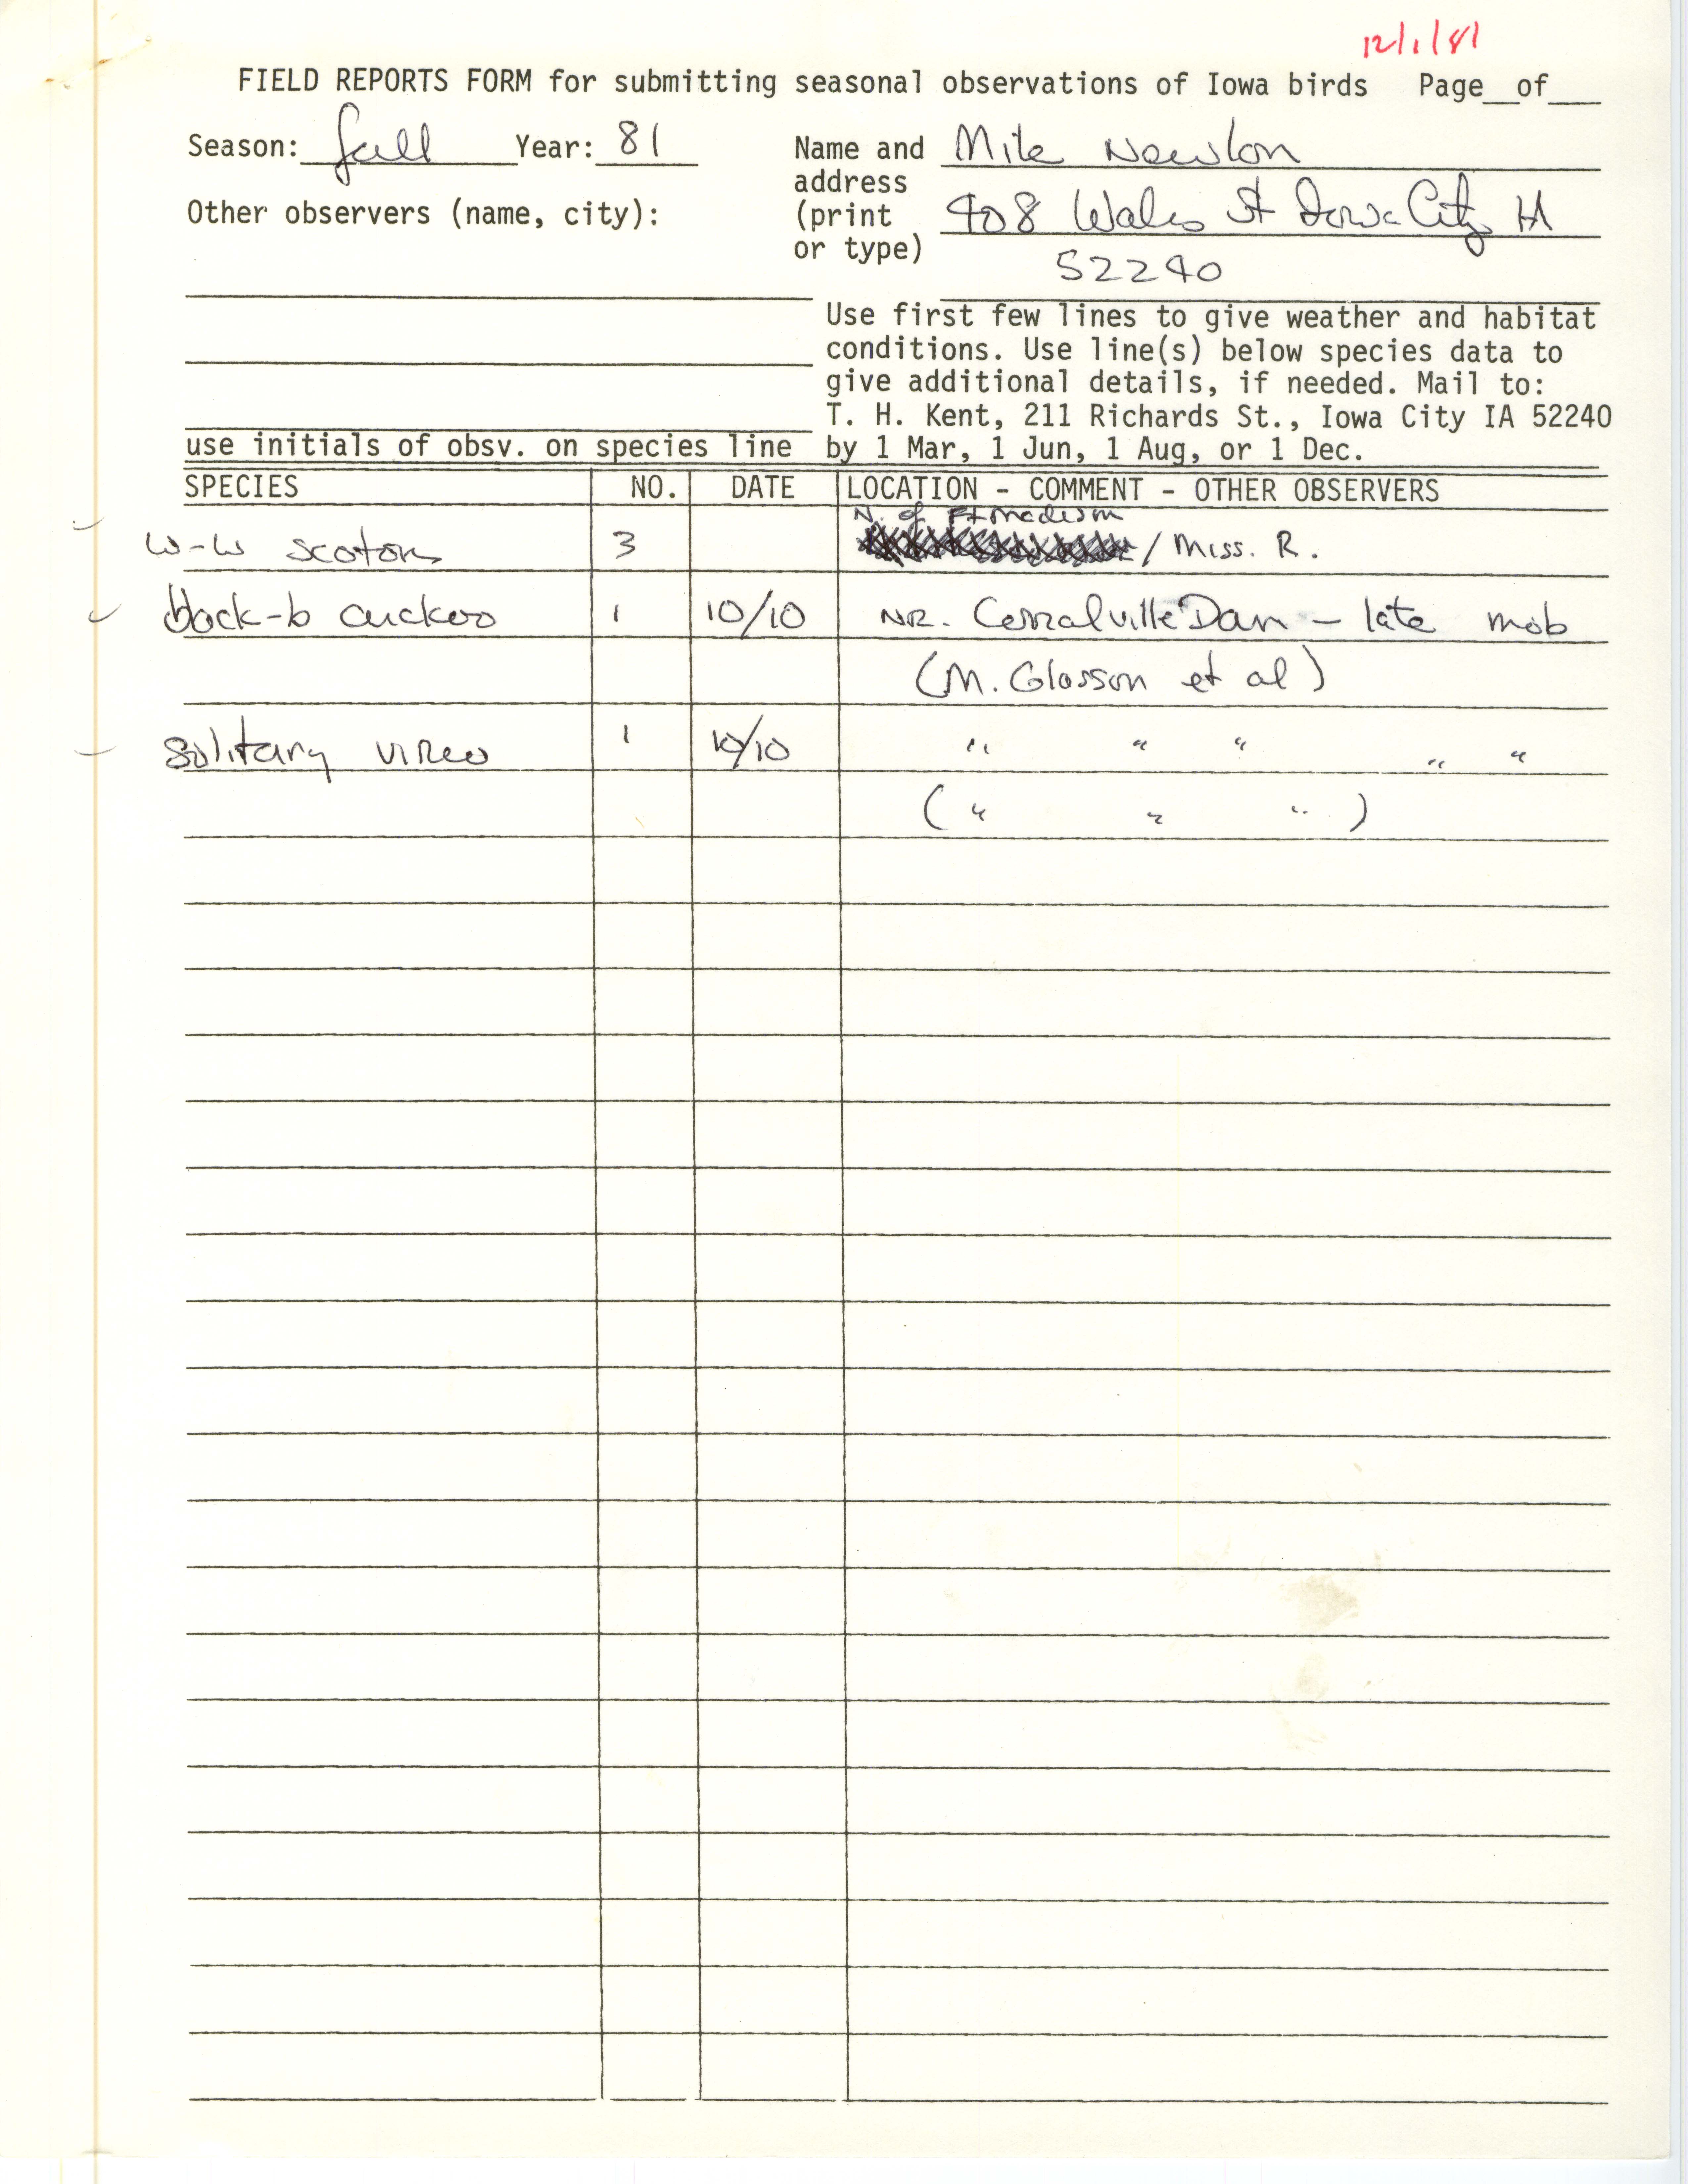 Field notes contributed by Michael C. Newlon, December 1, 1981